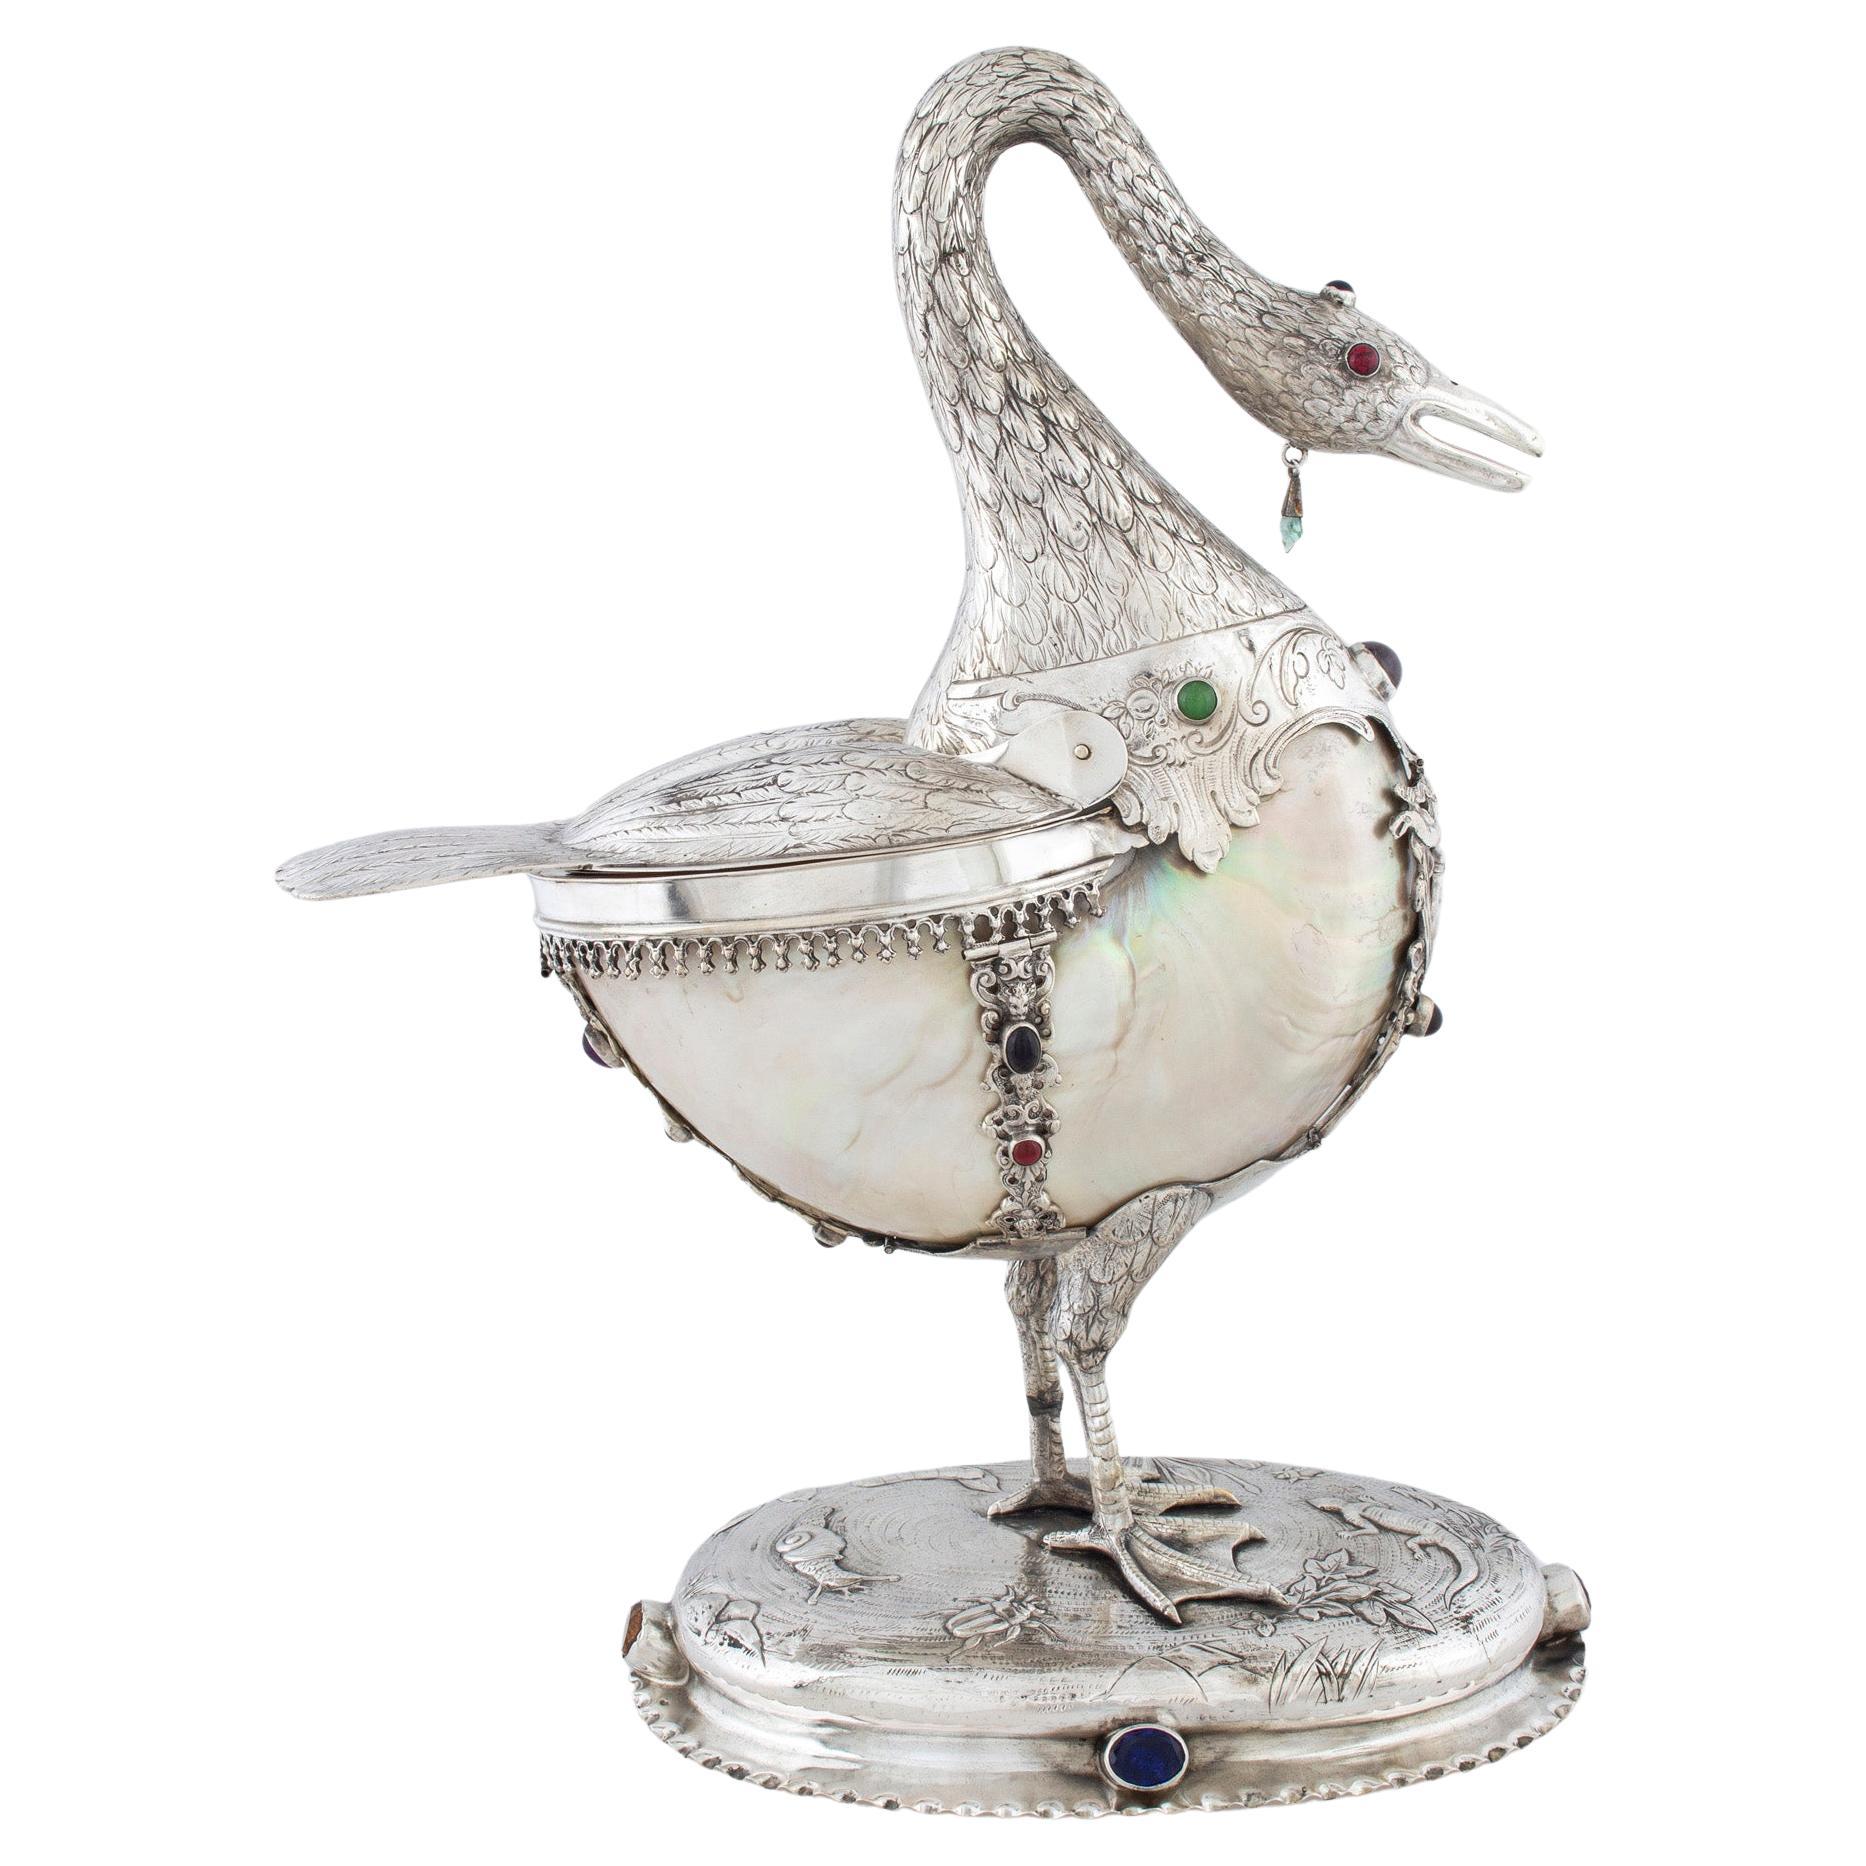 Swan-shaped Centerpiece, Silver Figural Centerpiece with Engraved Decorations